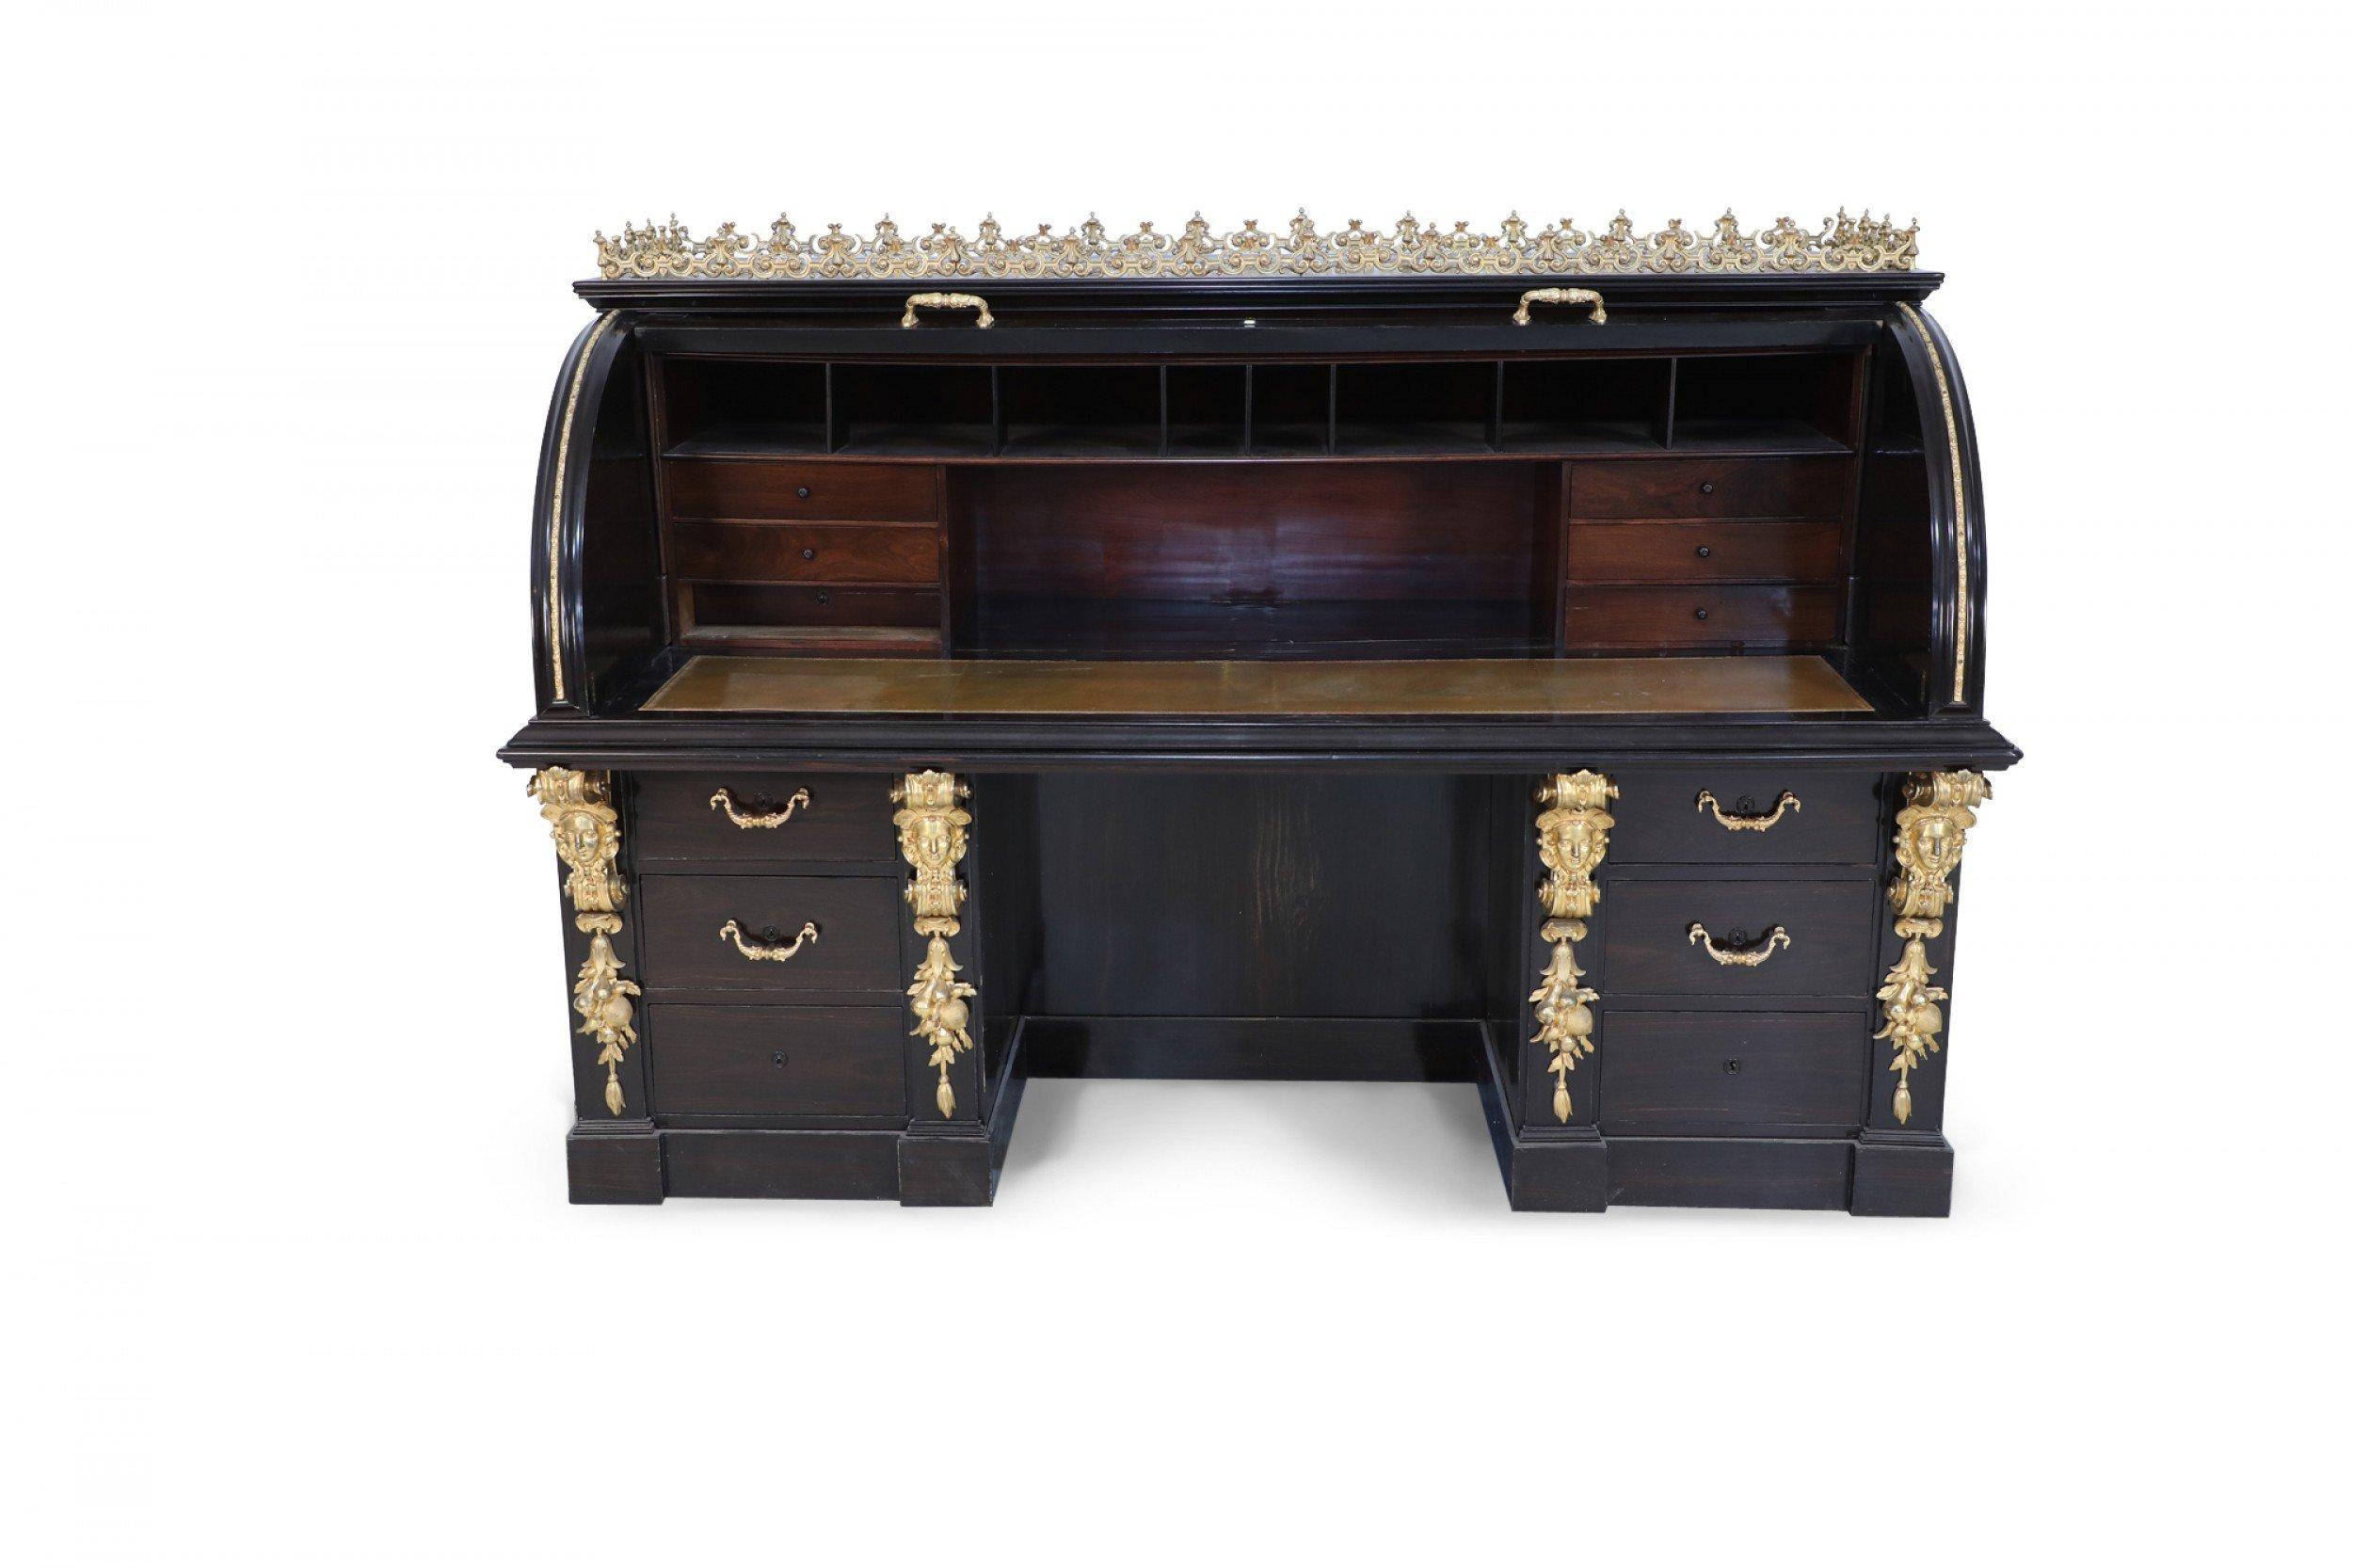 English Victorian style mahogany roll top desk that opens to reveal drawers, letter holders, and a gold embossed leather desk surface, with a gilt bronze filigree gallery top, under two columns of drawers, each with a gilt bronze pulls flanked by